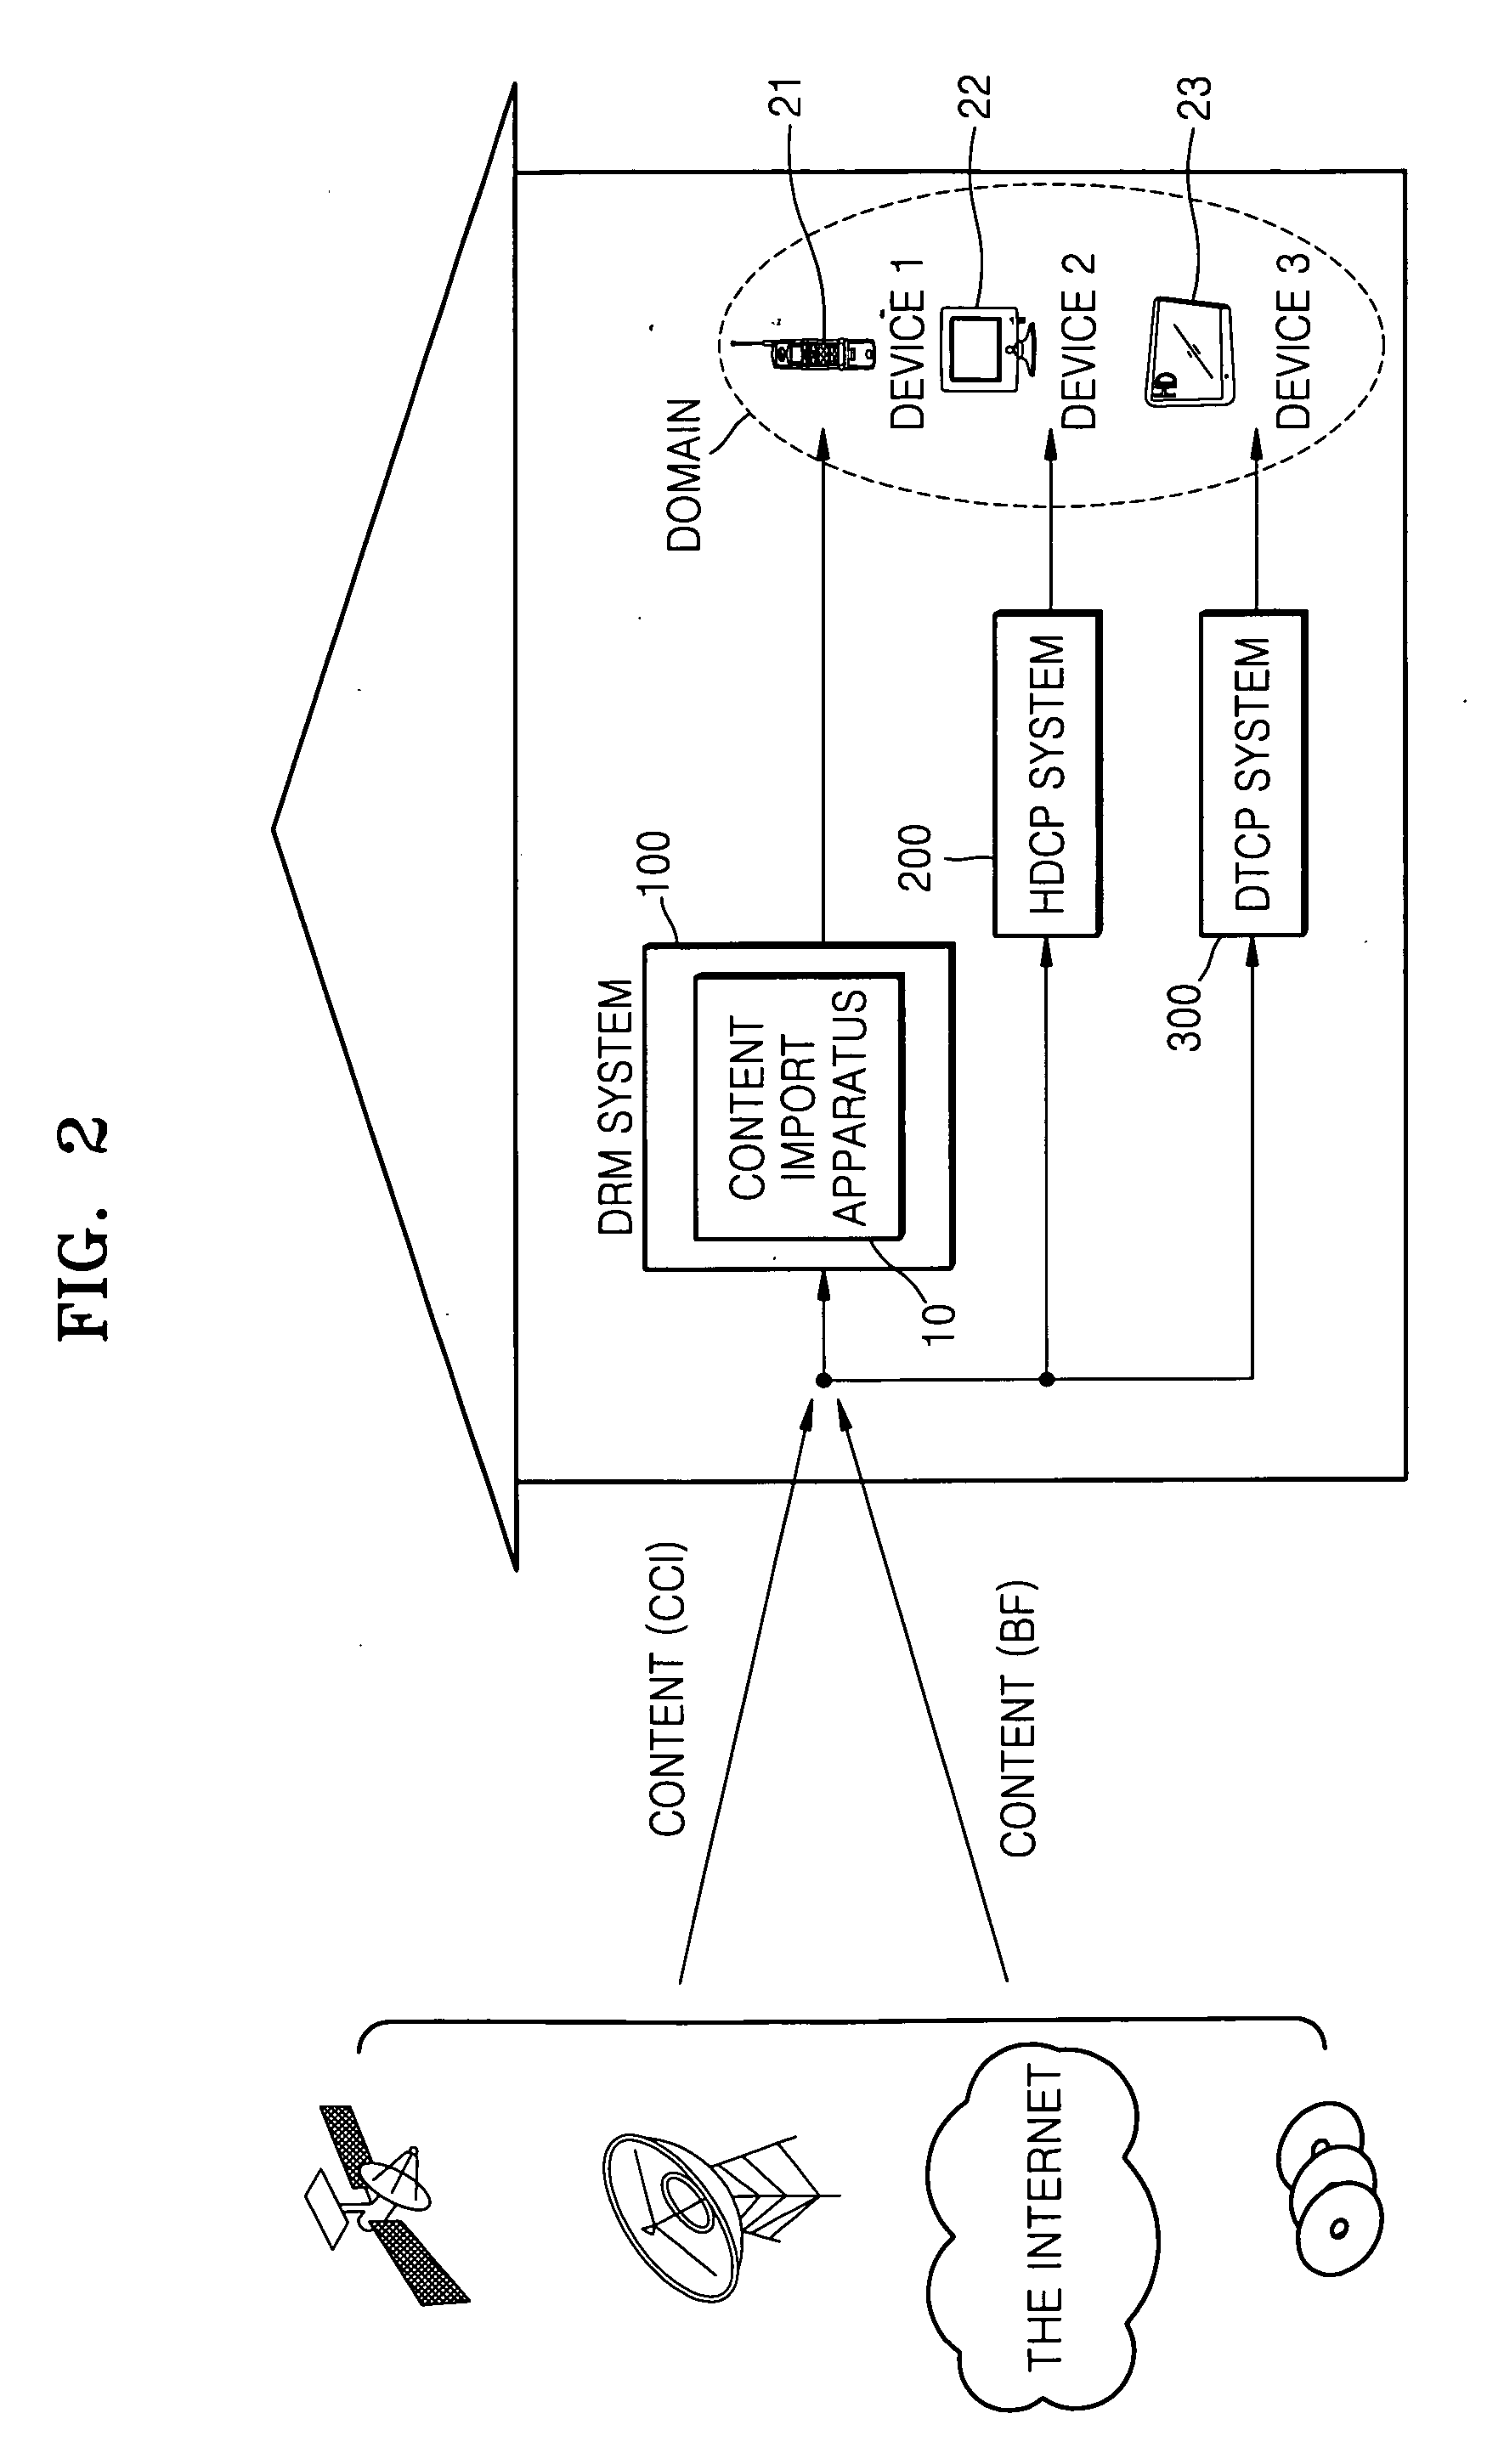 Method and apparatus for generating a license